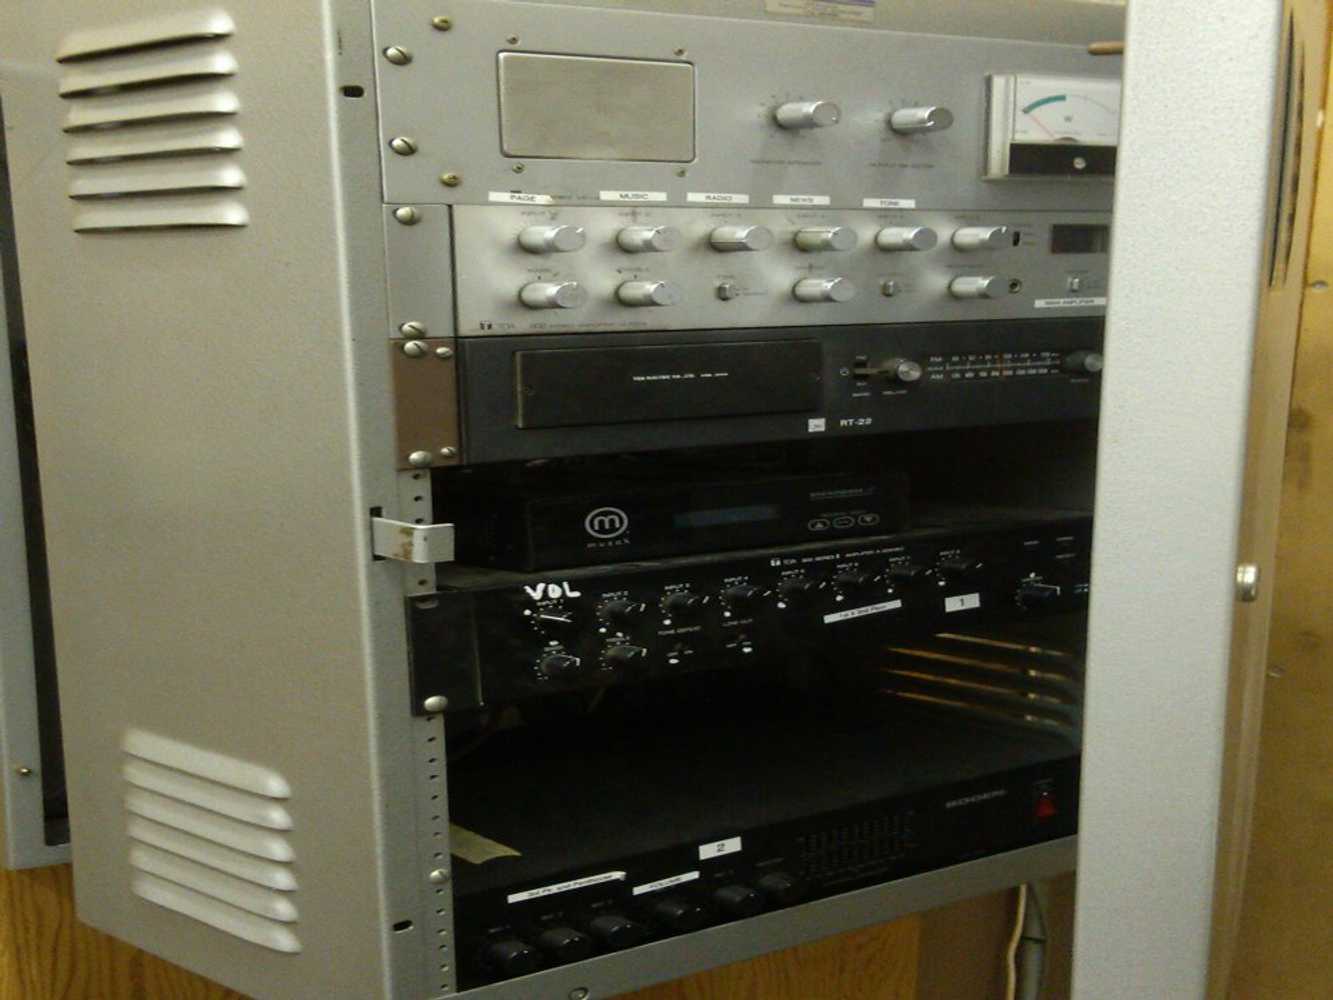 Photos from American Tele-Connect Services, Inc.